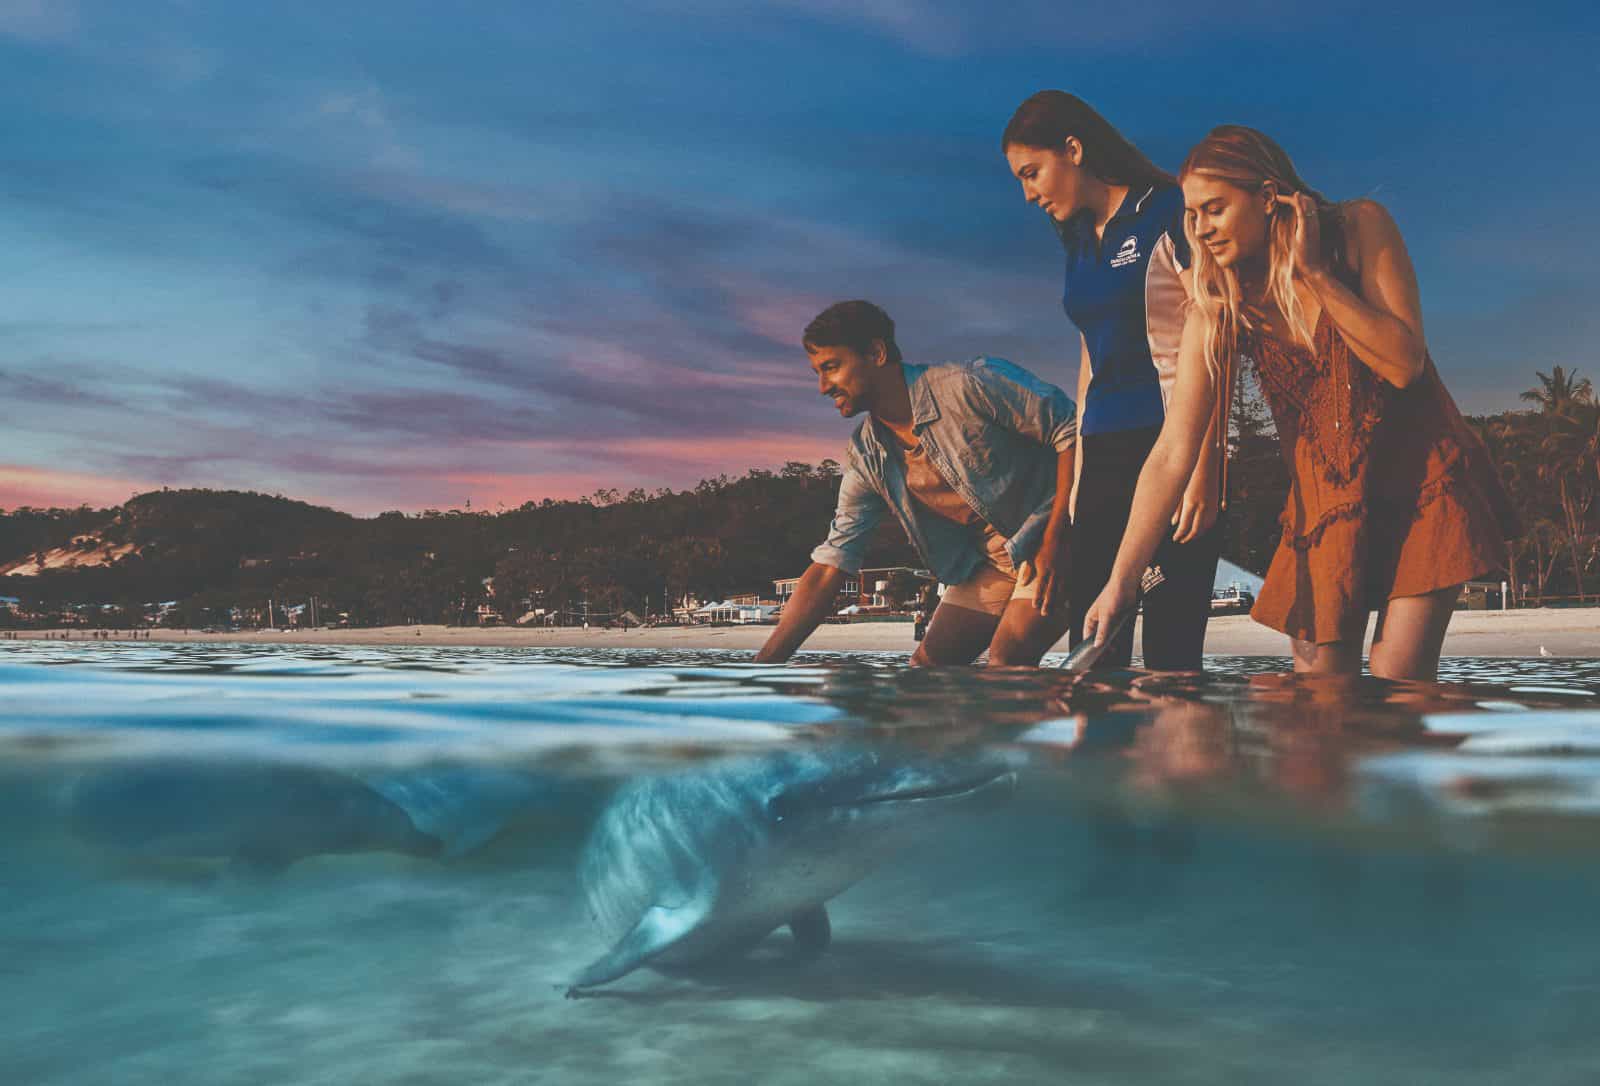 Feed Wild Dolphins at Tangalooma Island Resort. Official guests of the resort only. Conditions apply